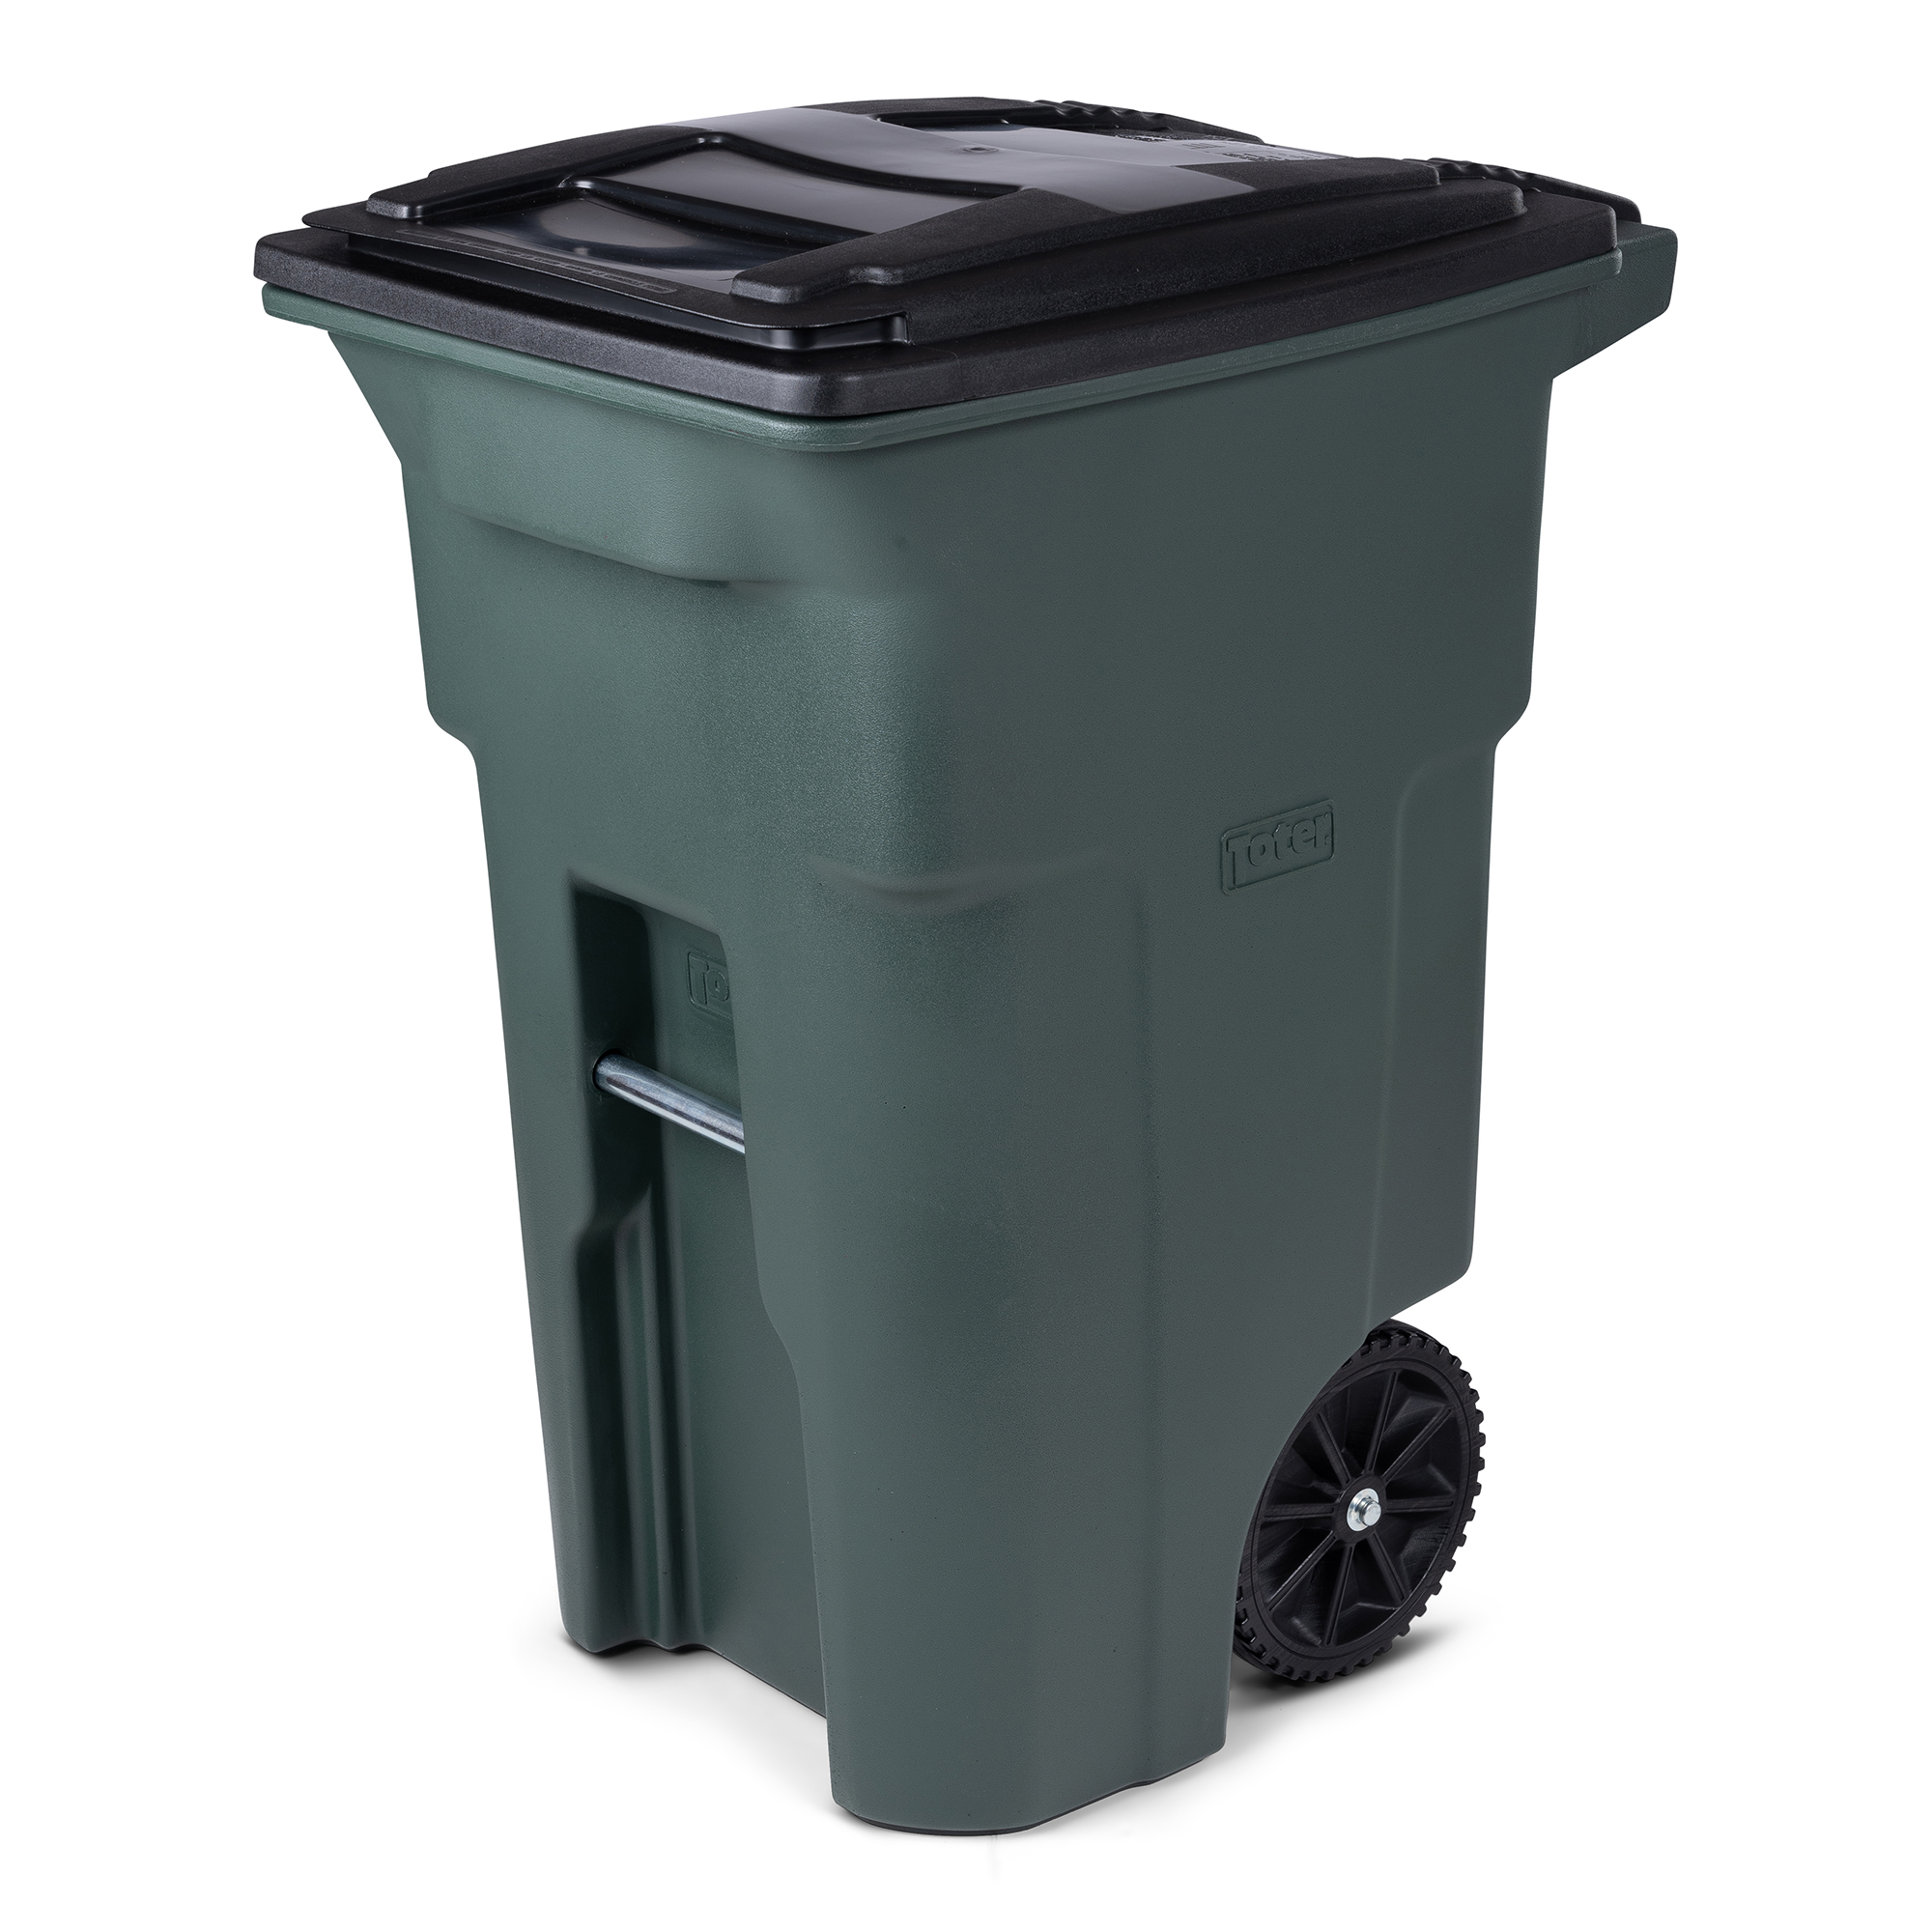 https://www.toter.com/sites/default/files/2021-05/Toter_64Gallon_TwoWheelCan_Green_25564_Main.png